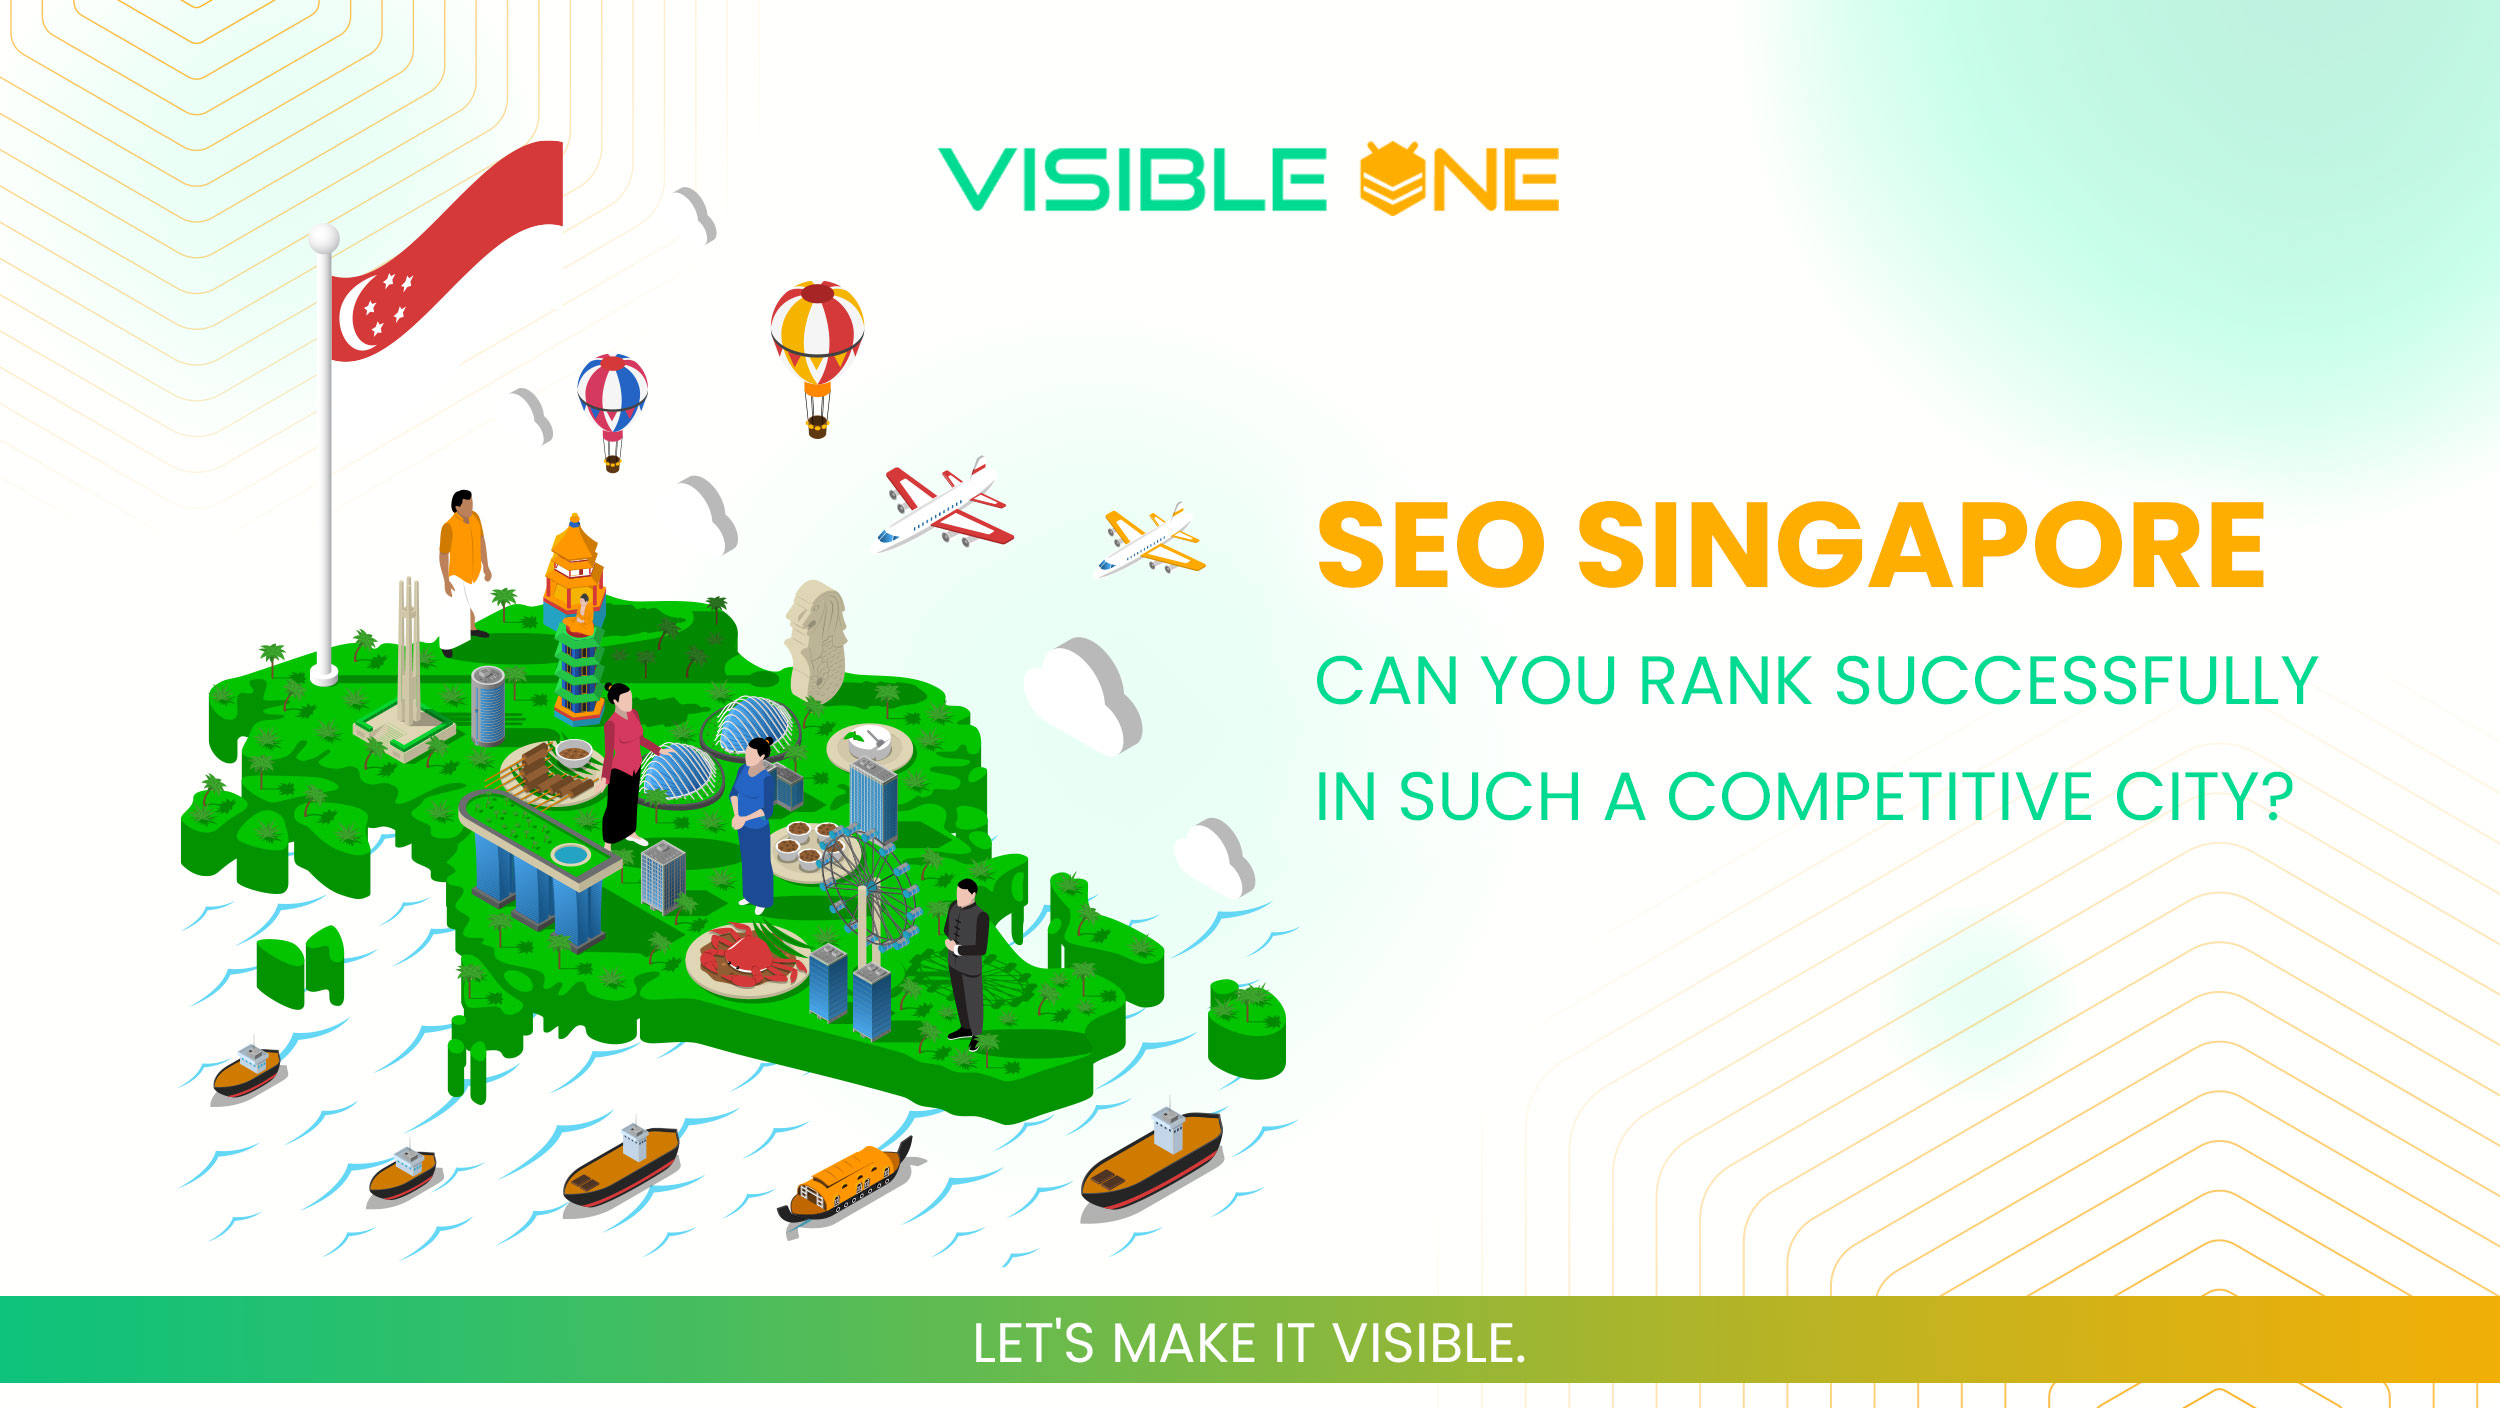 SEO Singapore – Can You Rank Successfully In Such A Competitive City?